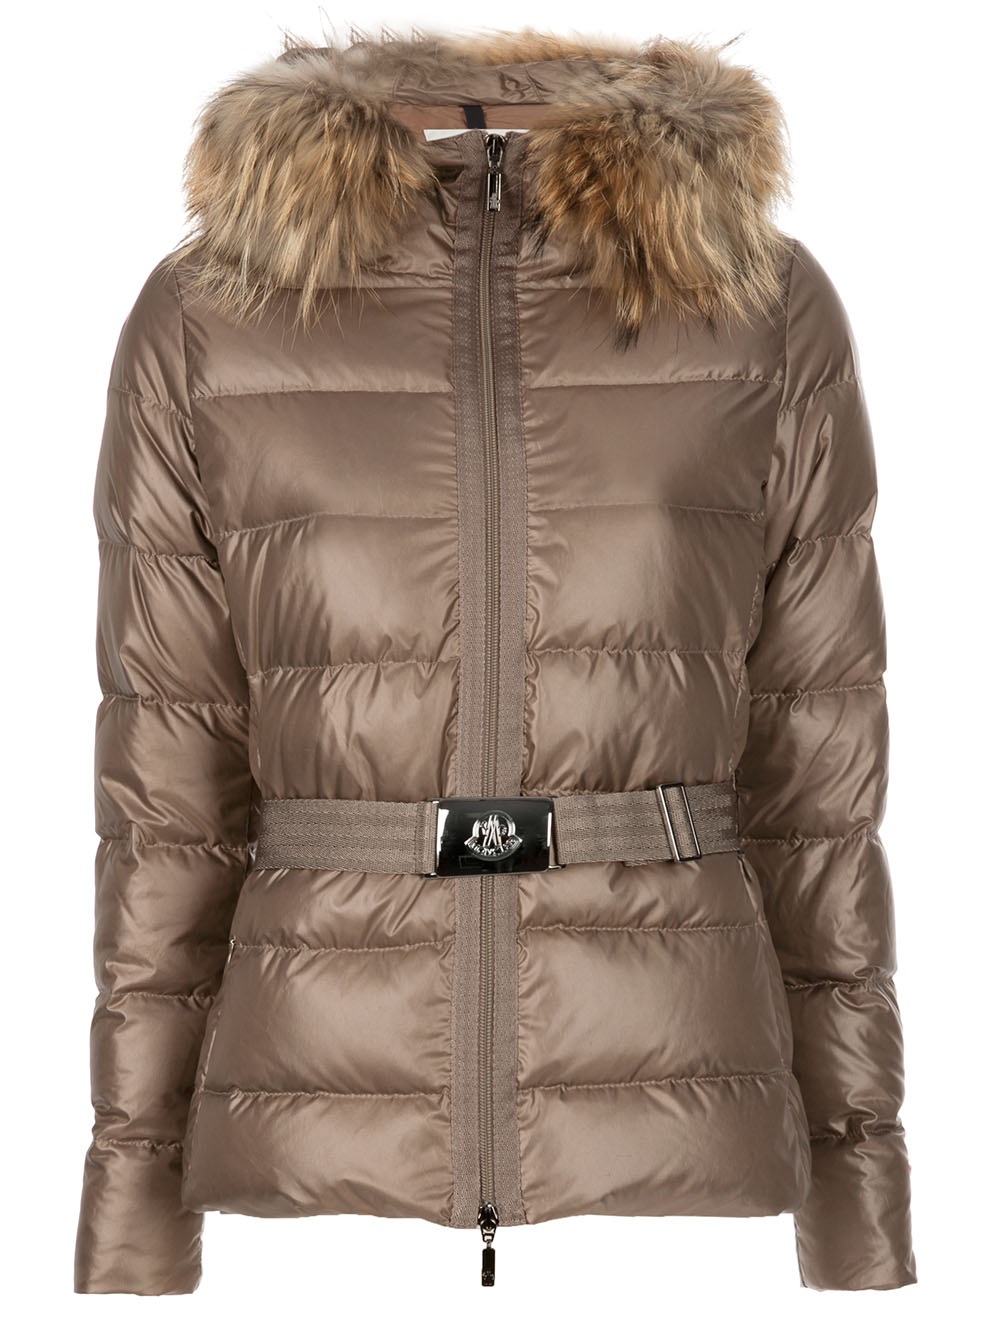 Moncler Angers Jacket in Taupe (Brown) - Lyst